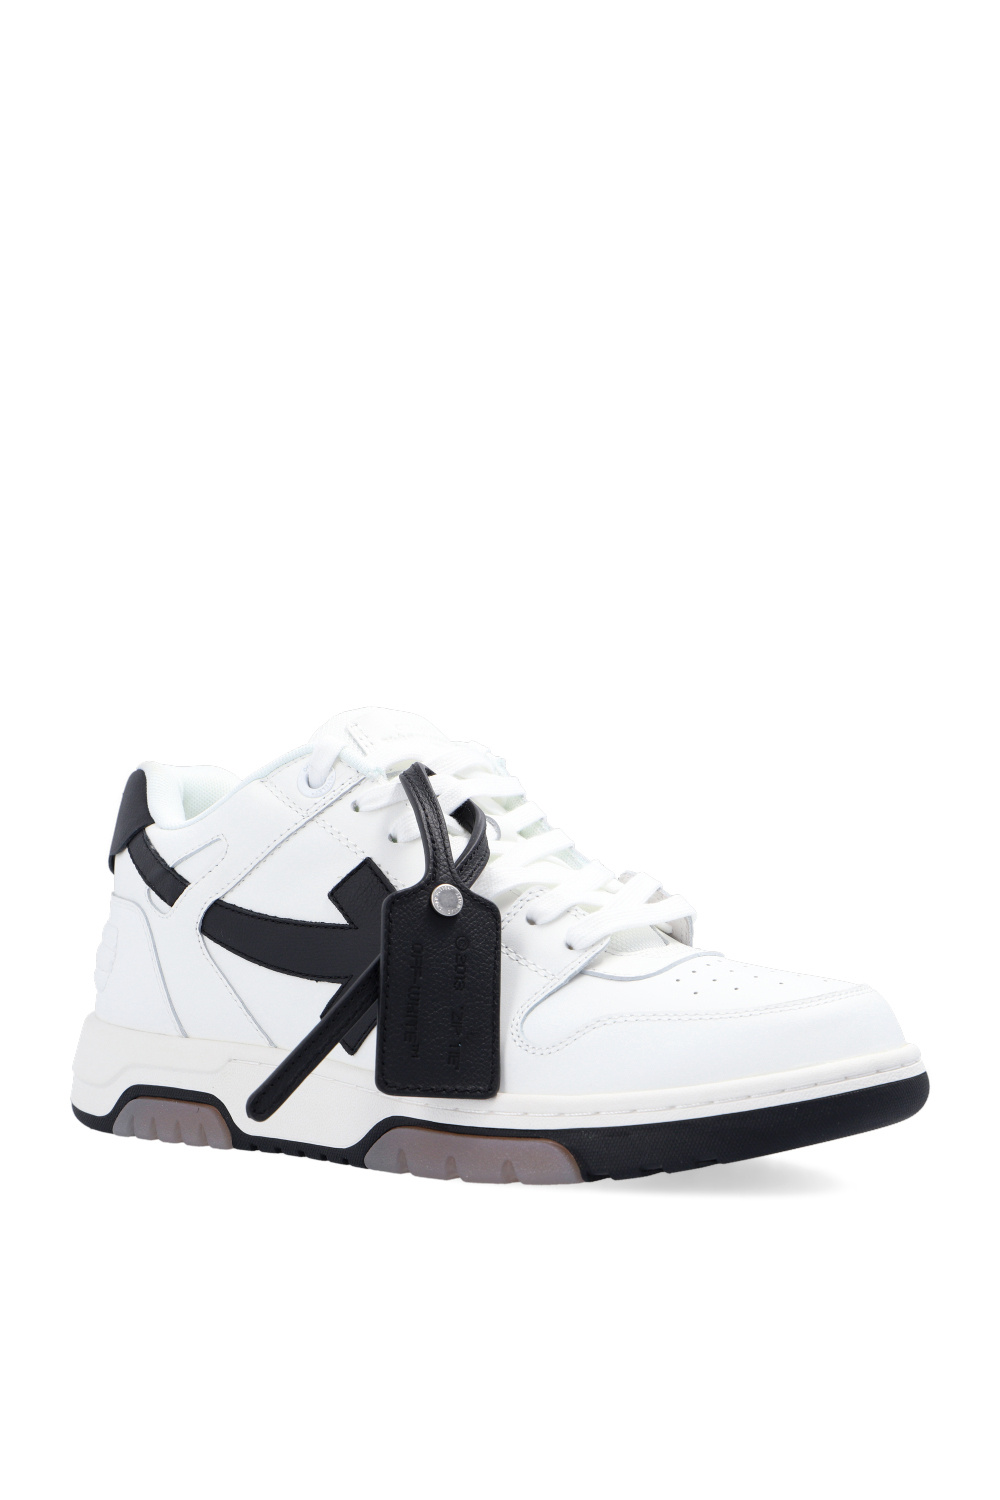 Off-White JW Anderson high-top platform sneakers Red